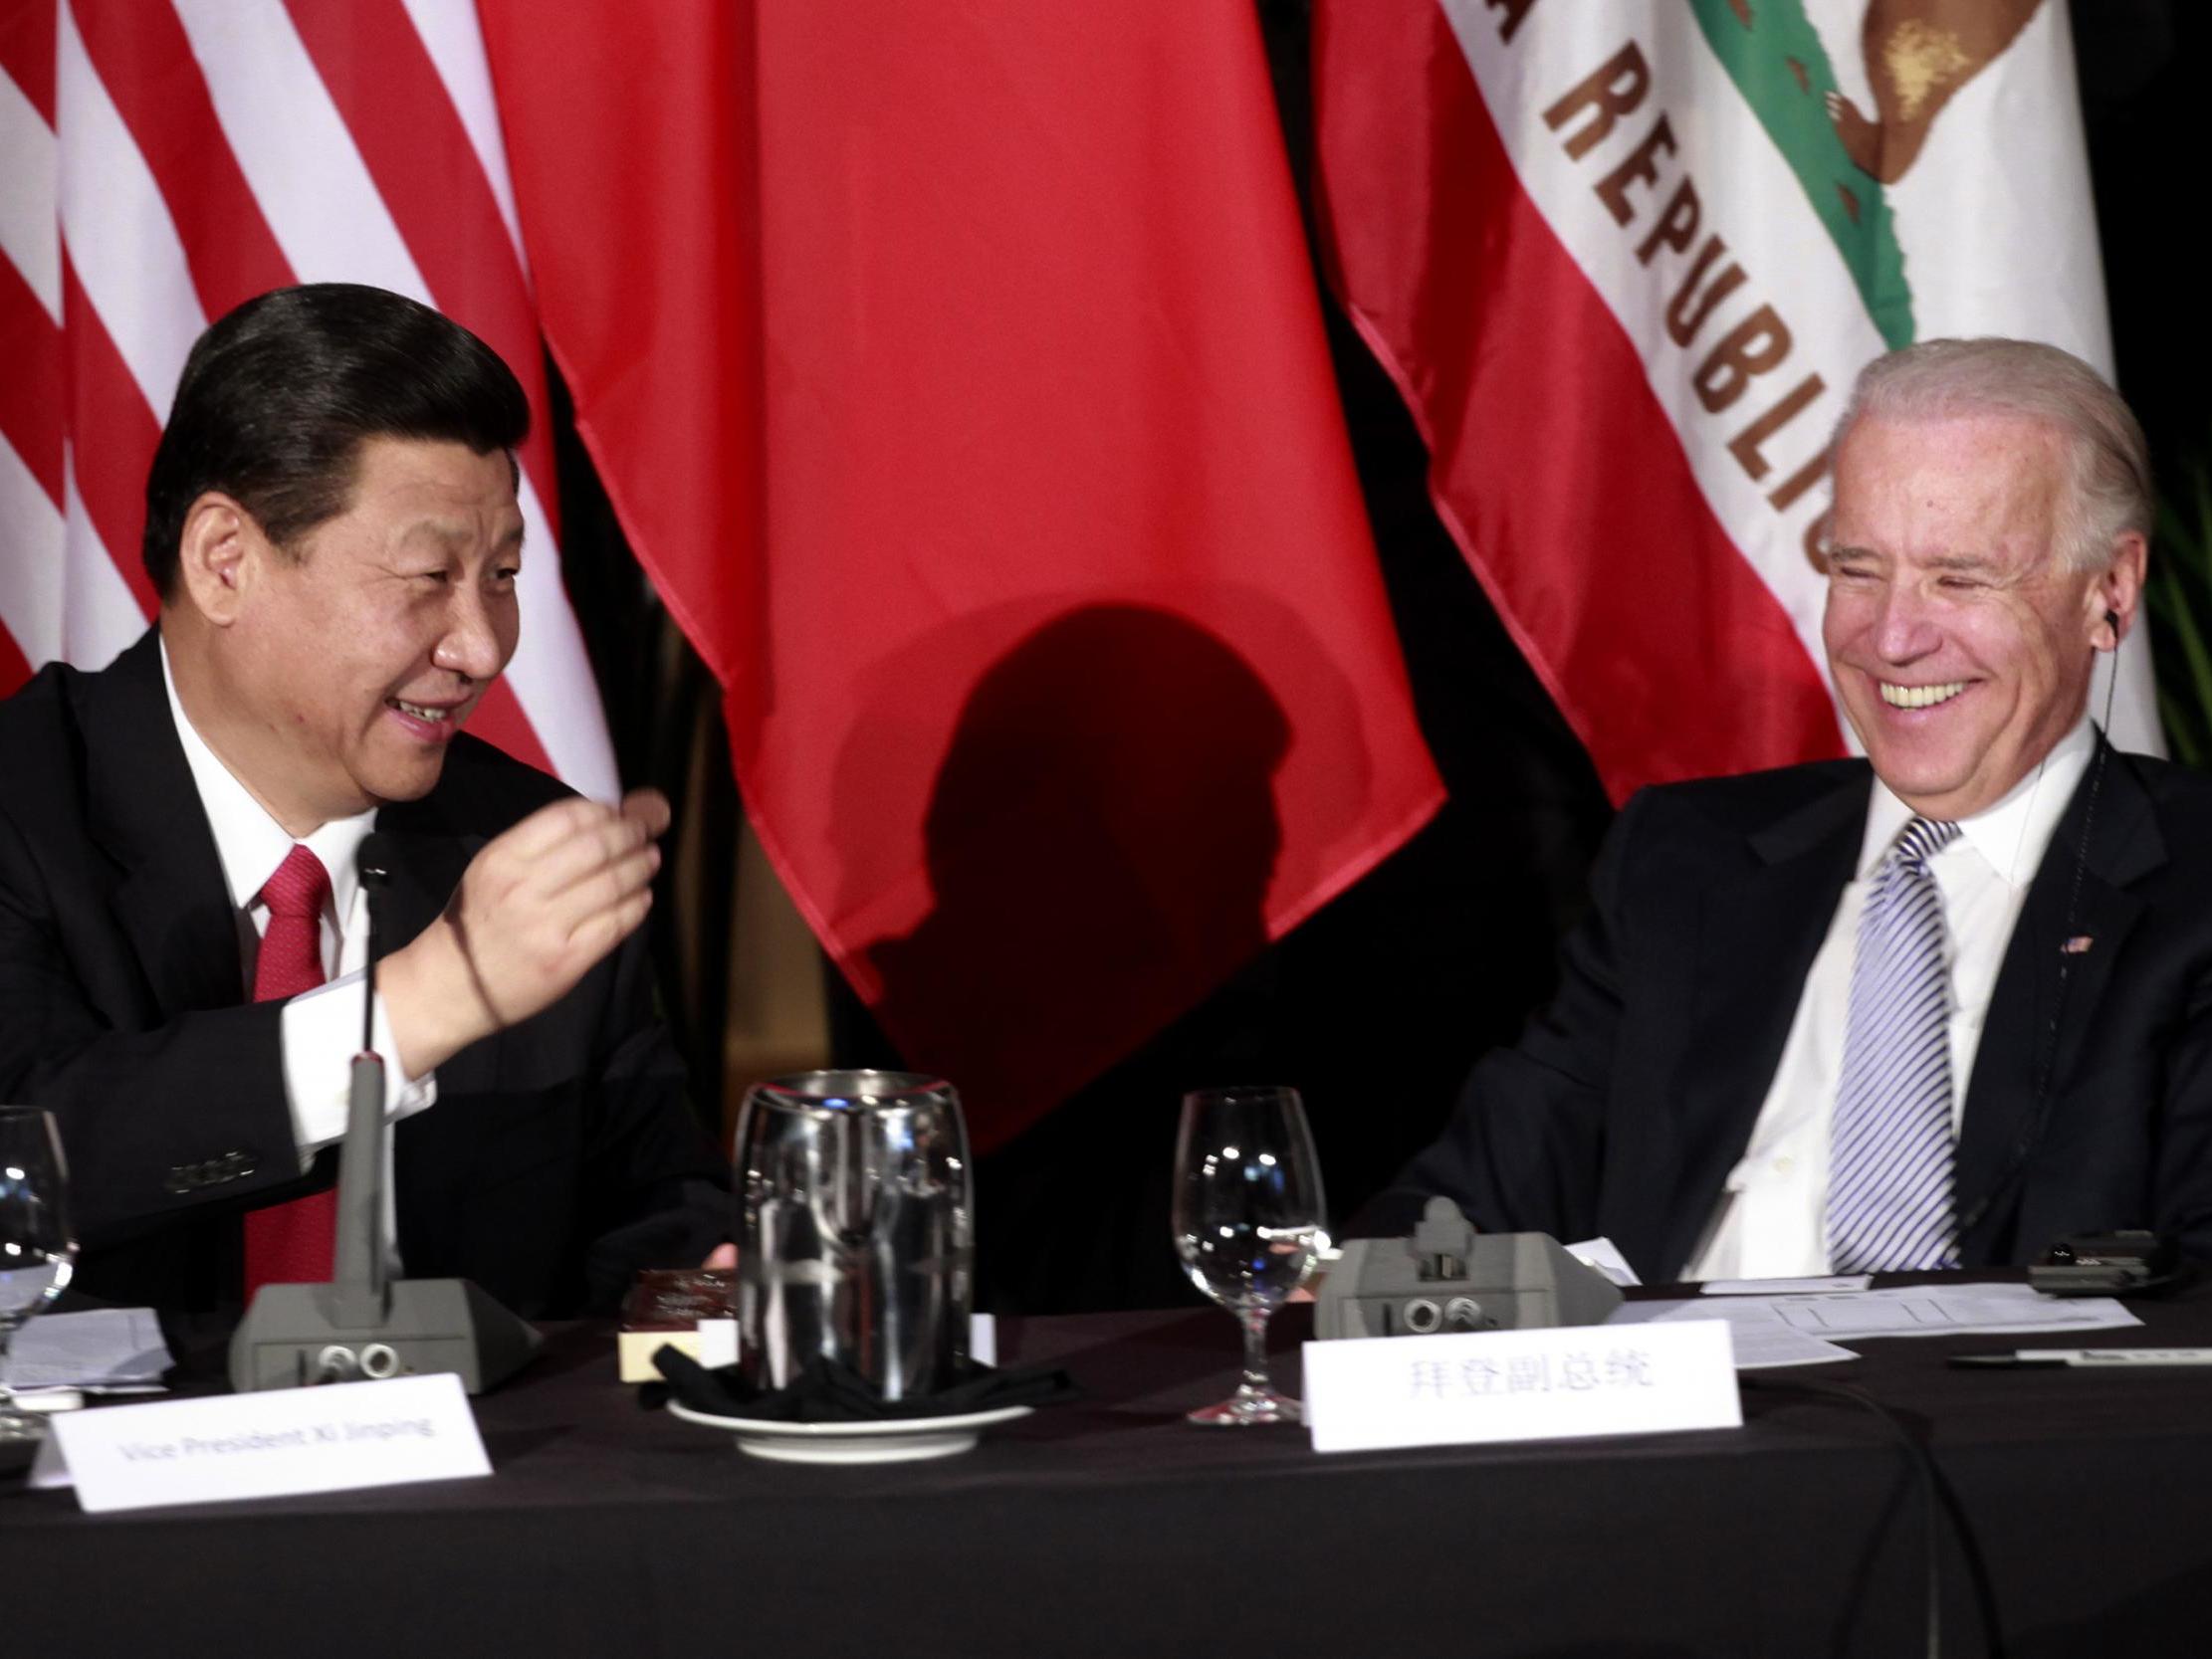 Then Chinese Vice President Xi Jinping shares a joke with then US Vice President Joe Biden at Disney Hall Los Angeles in 2012 (Getty Images)